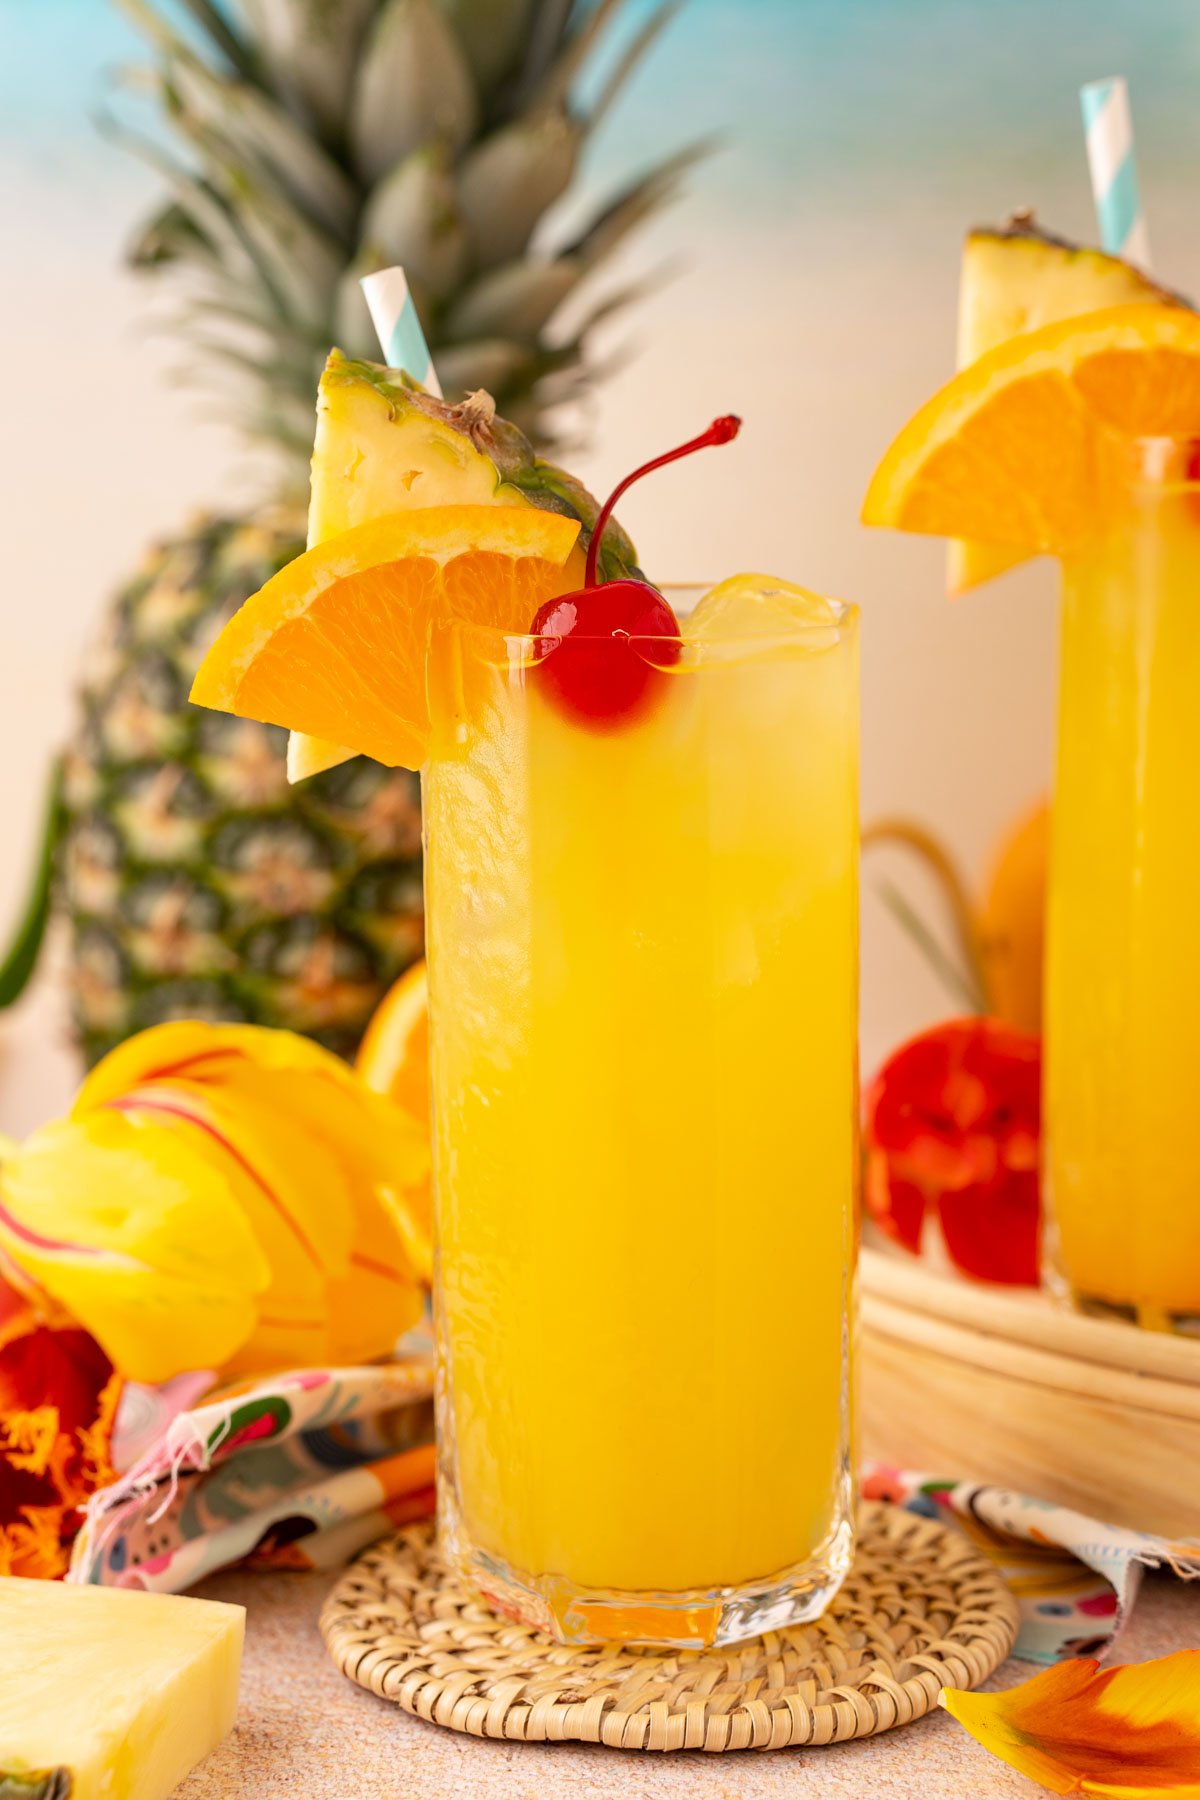 A tall glass of pineapple punch garnished with a cherry, orange slice, and pineapple wedge.